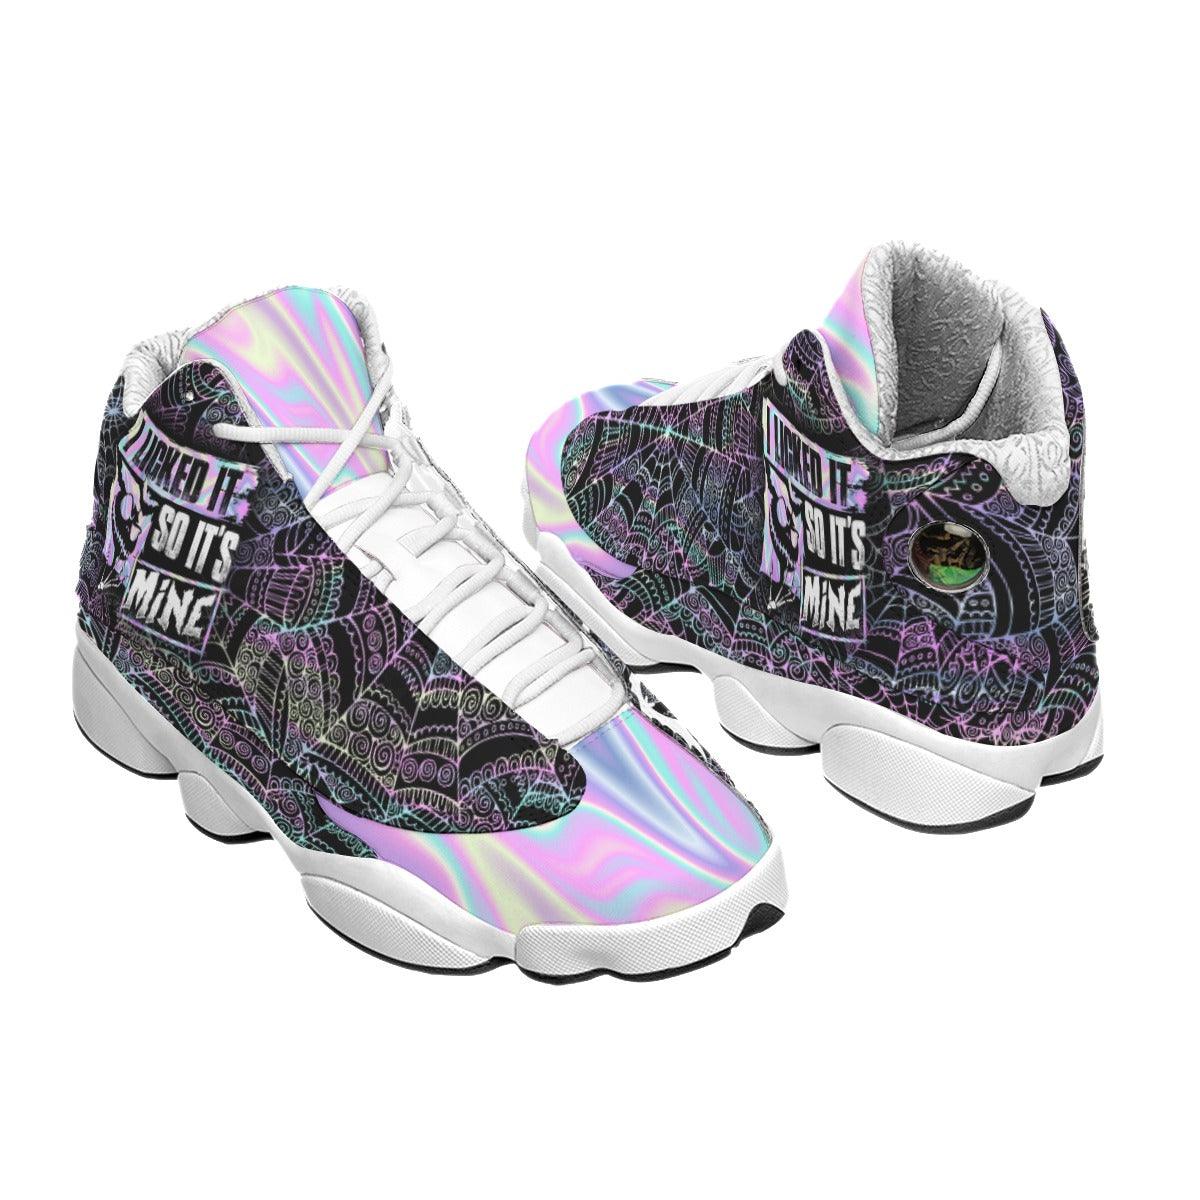 Nightmare Funny I Licked Men's Curved Basketball Shoes - Wonder Skull